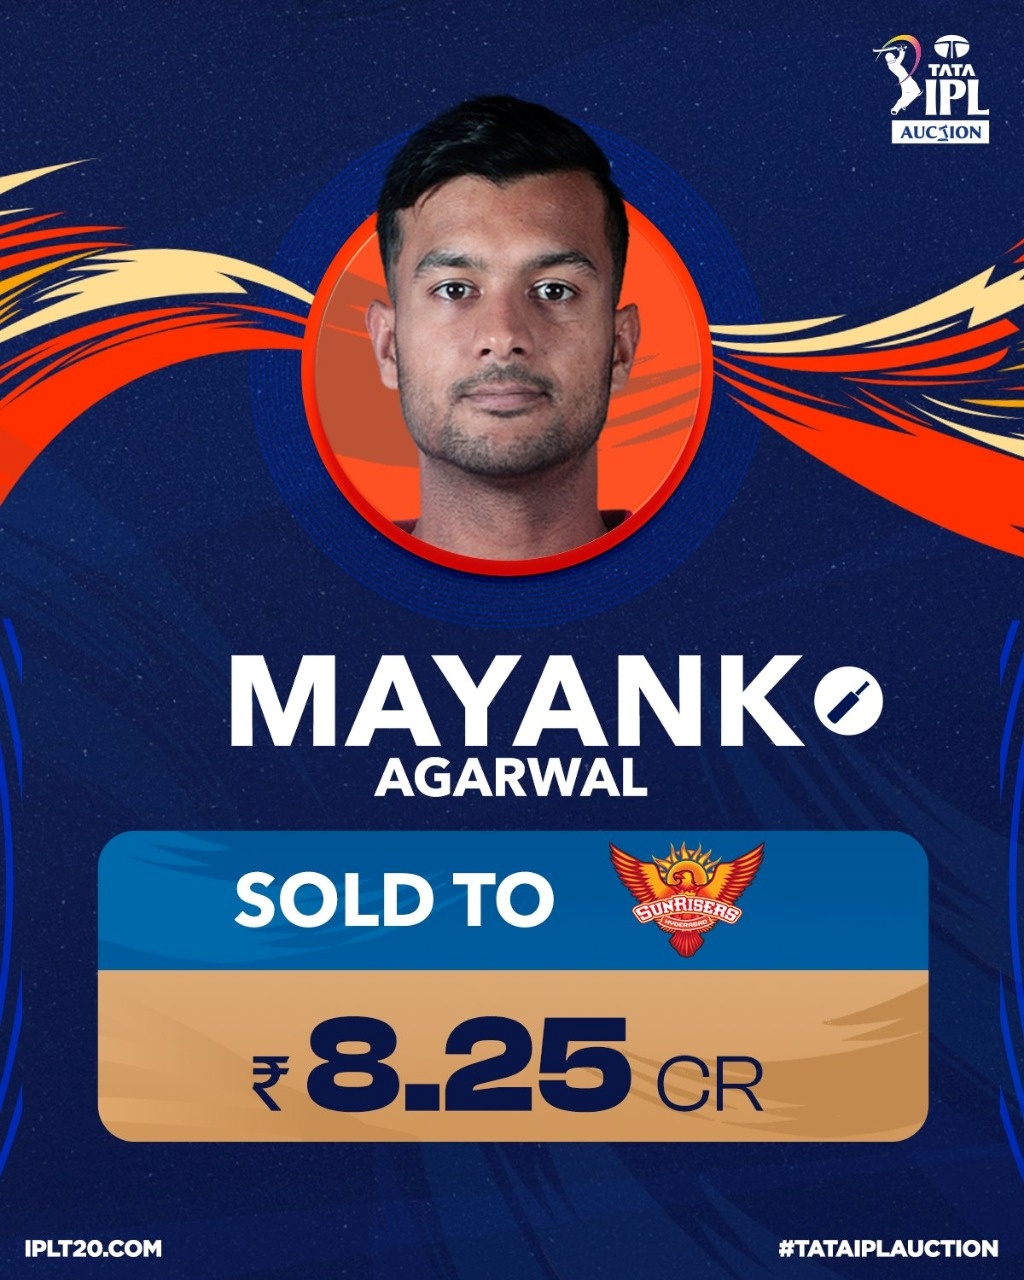 Mayank Agarwal was also bought by Hyderabad for 8 crores.